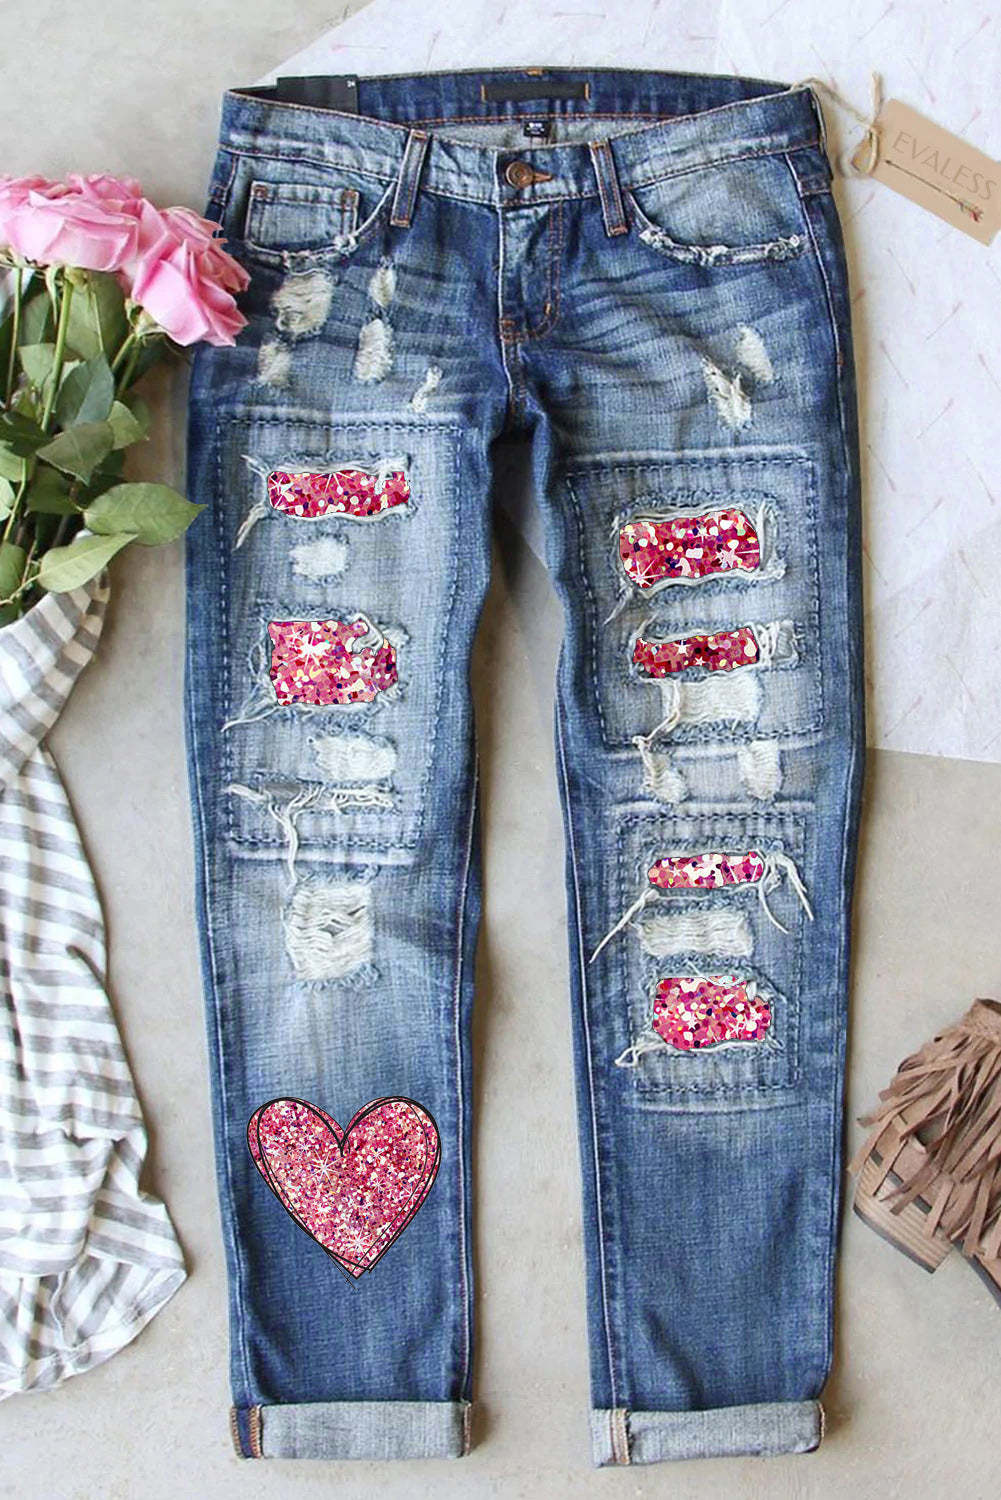 Shining Pink Heart-shaped Mid Waist Denim Ripped Jeans $ 29.99 - Evaless